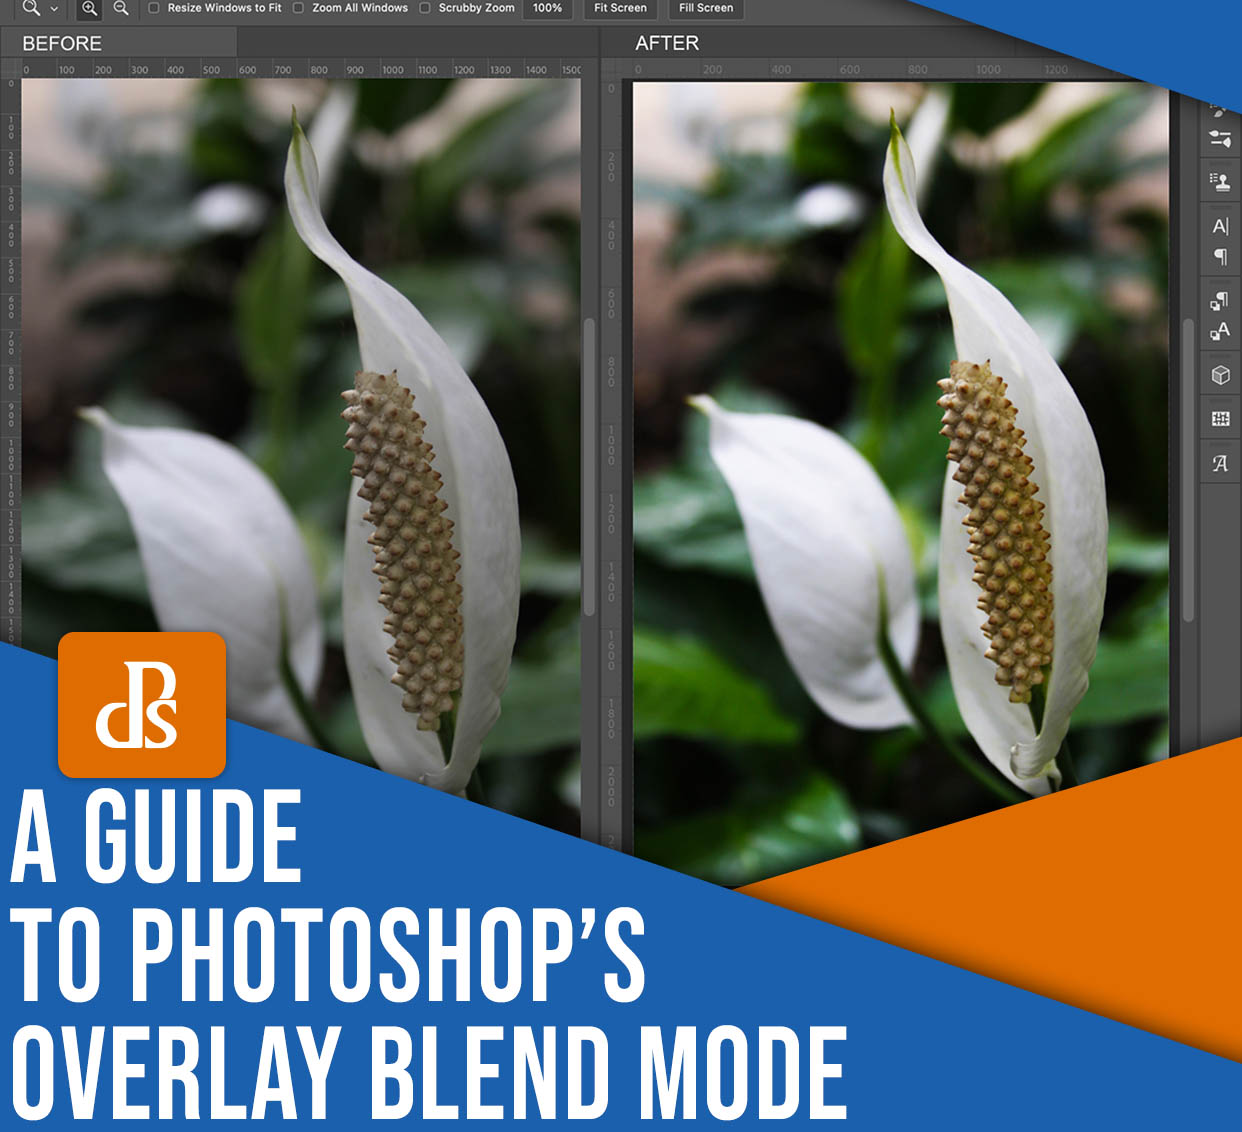 A guide to Photoshop's Overlay blend mode